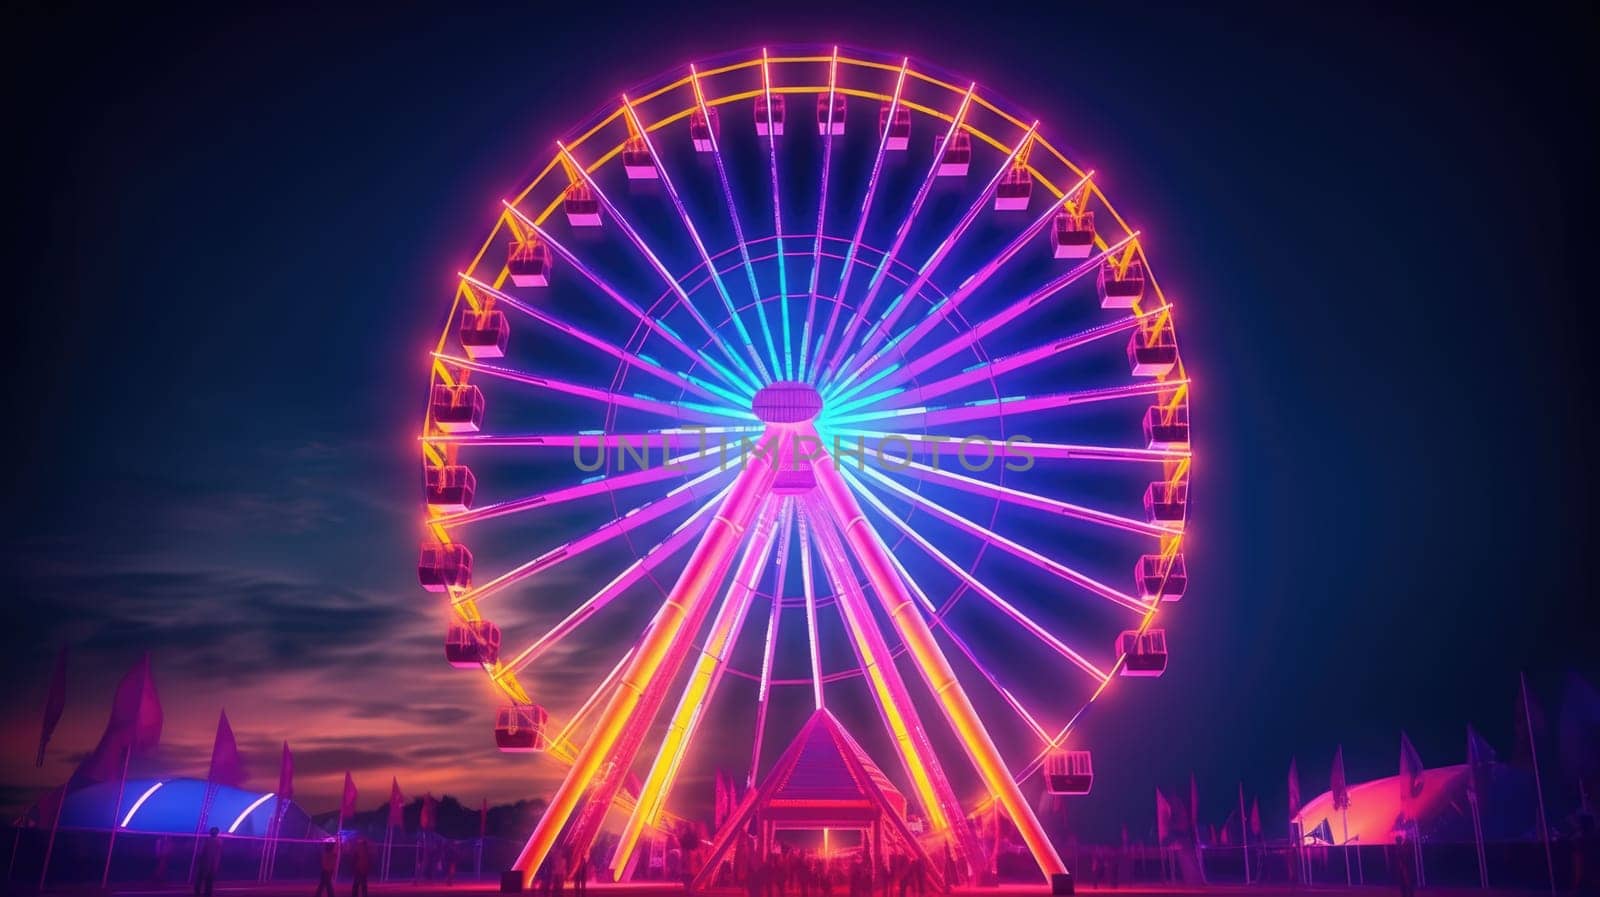 A Ferris wheel at an amusement park is lit up with rainbow colors at night. The Ferris wheel is in focus, and the background is blurry. The Ferris wheel is isolated on a black background.